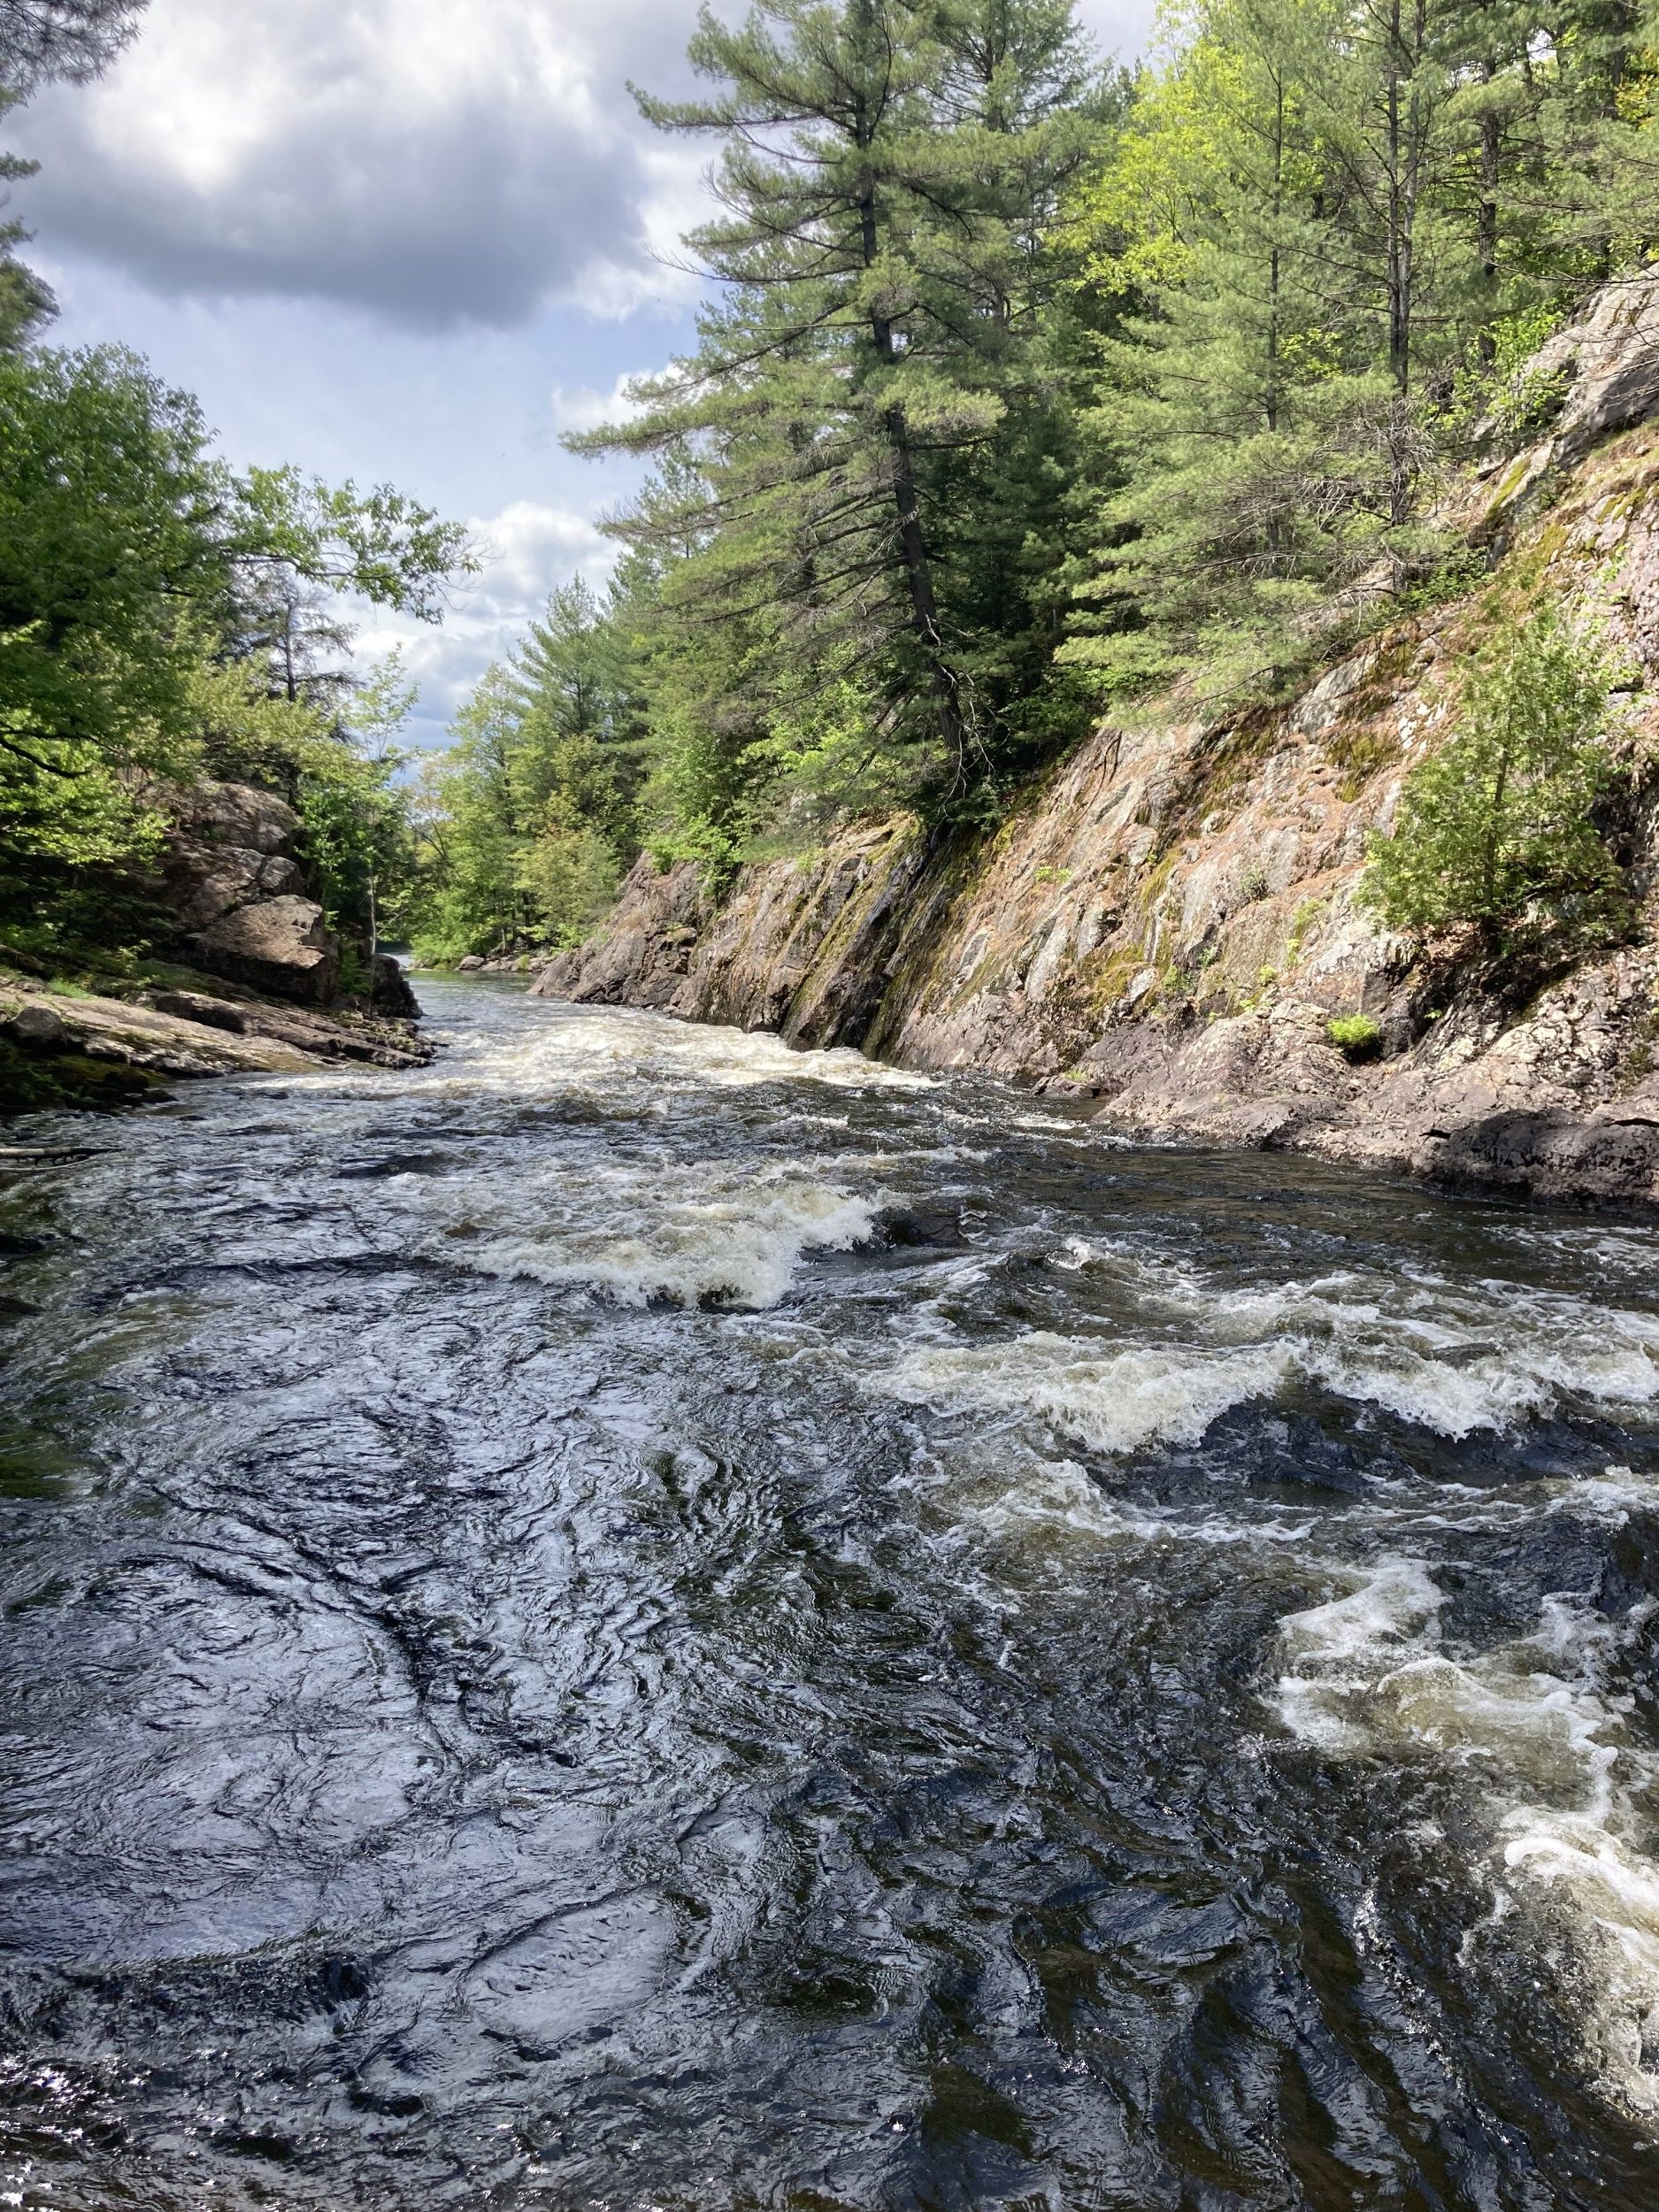 A photo of a moving river with a rock cliff on one side.